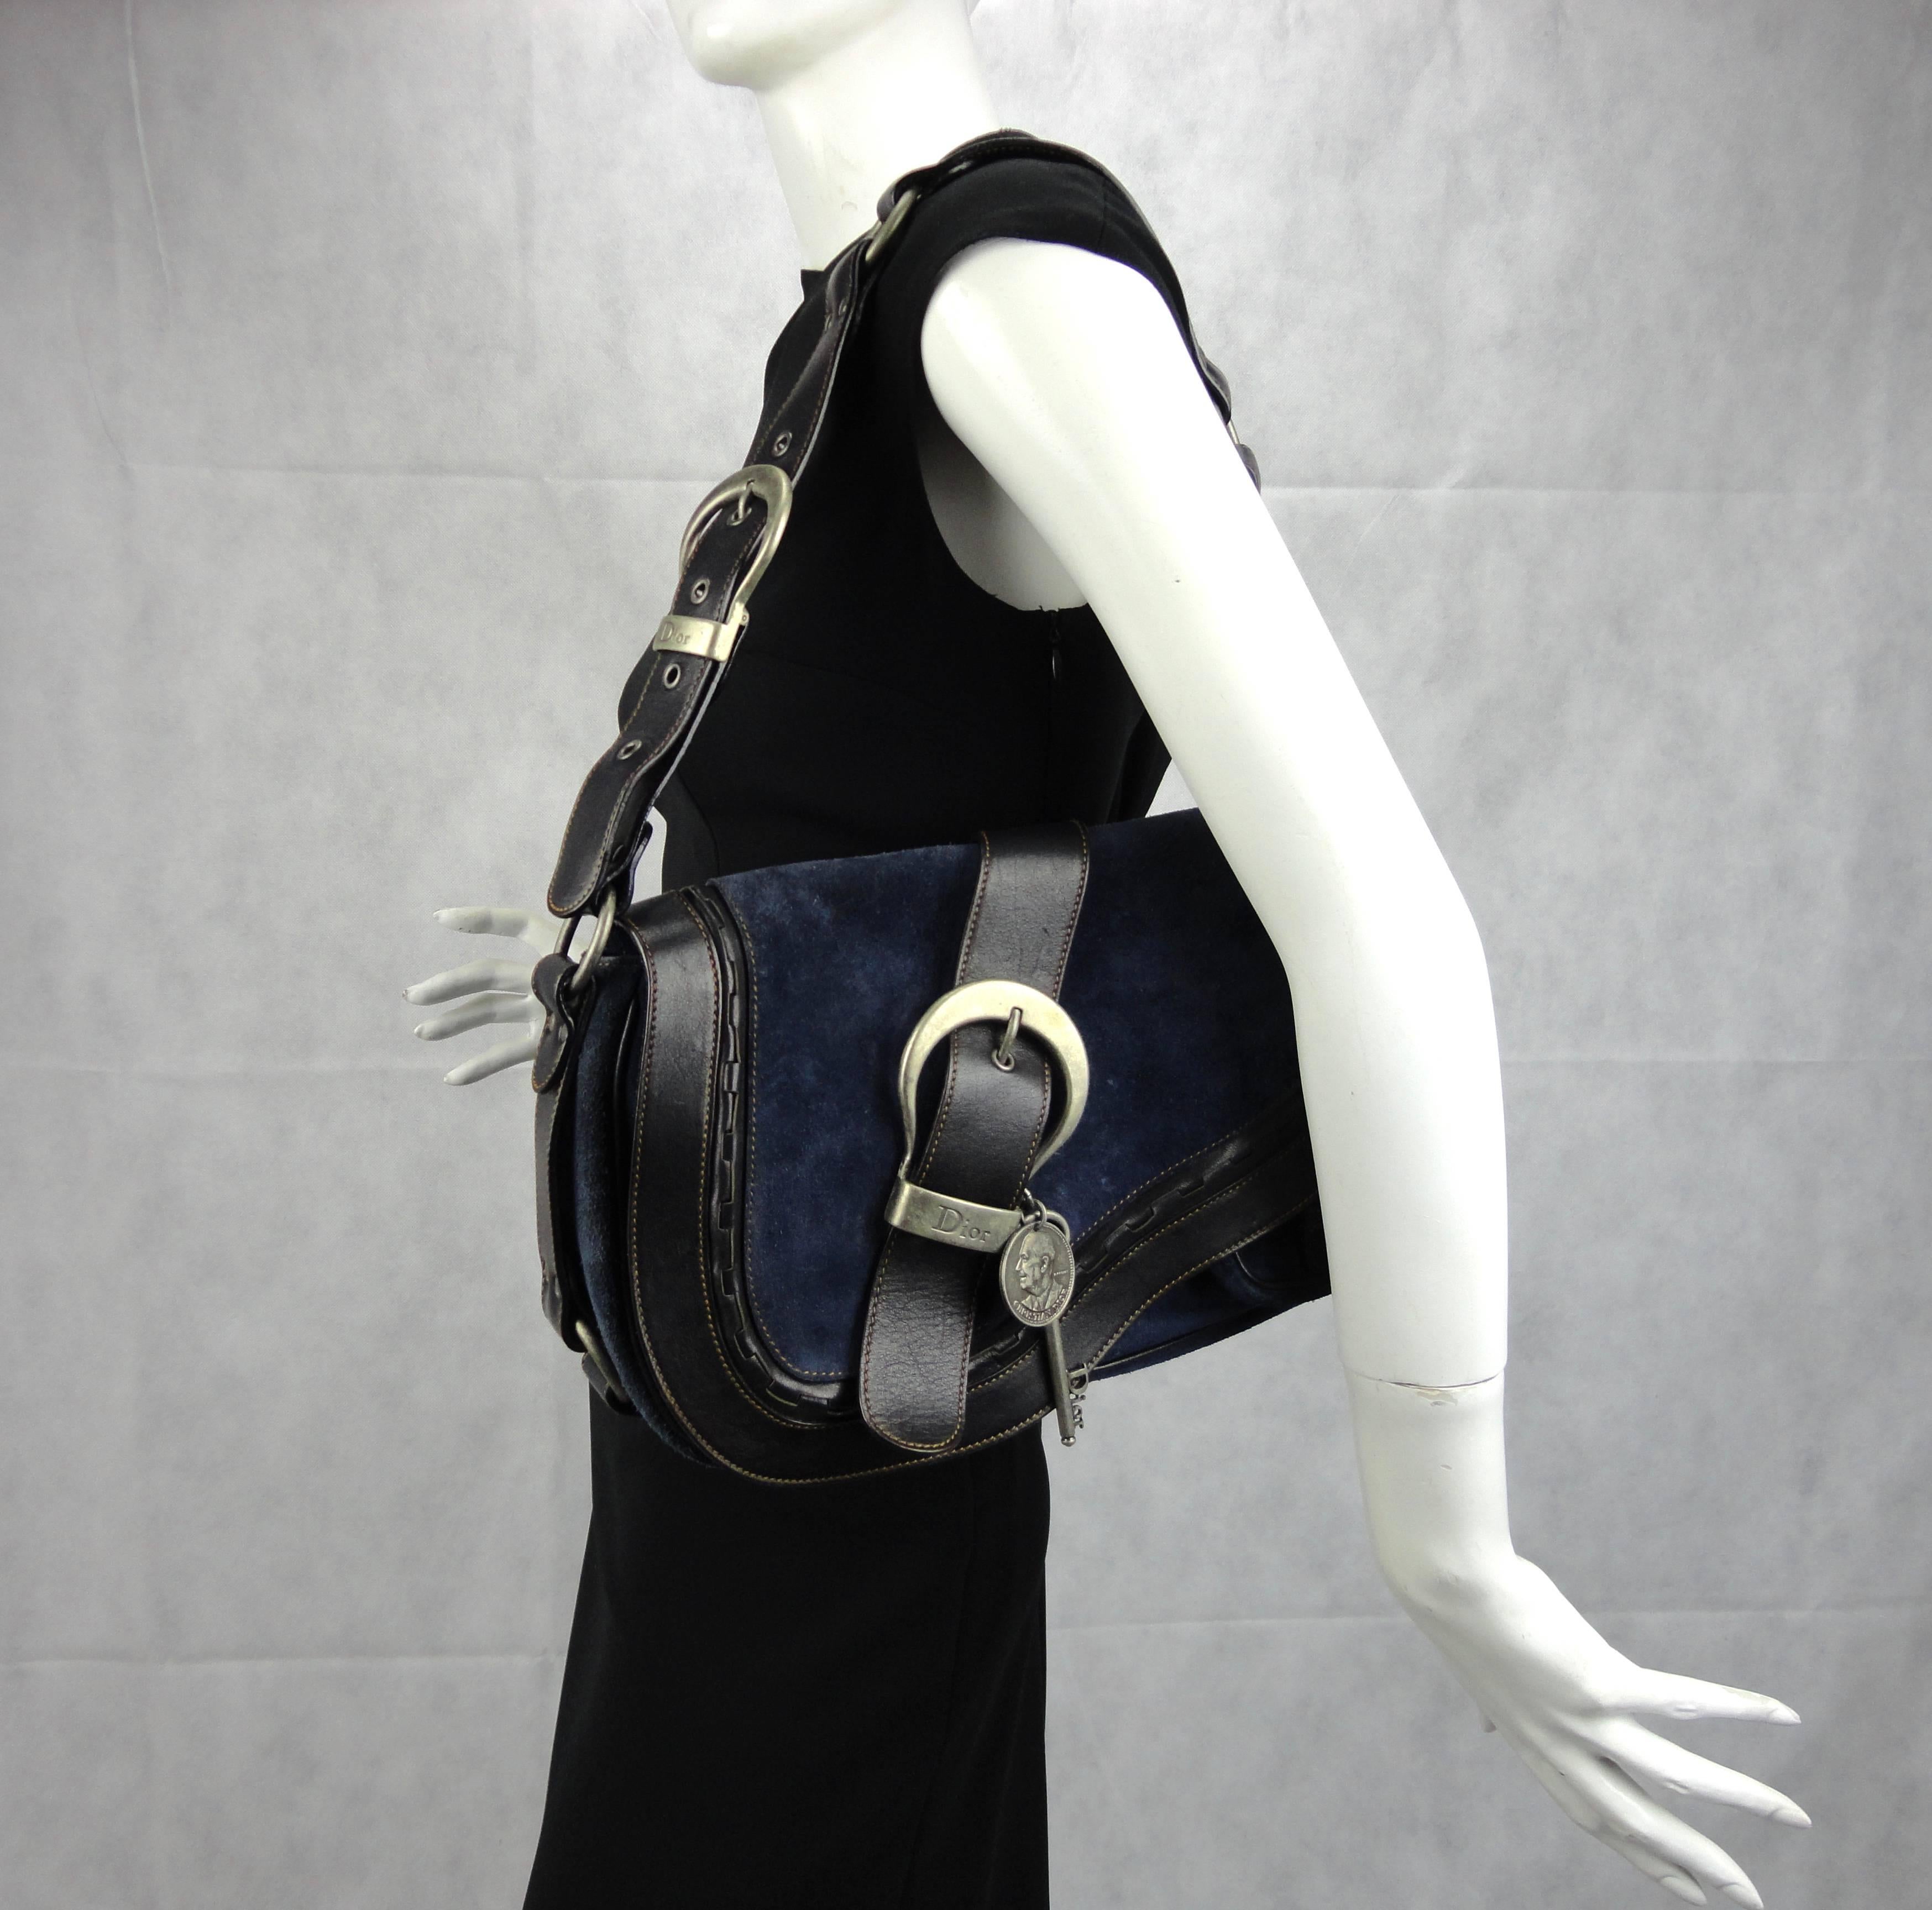 Dior Gaucho bag in blue suede and black leather. Monogram signature interior with a zip pocket. Features adjustable shoulder strap, silver tone hardware and exterior flap pocket.
Very good condition, only carried once.

Measures: H 22cm x W 36cm x D